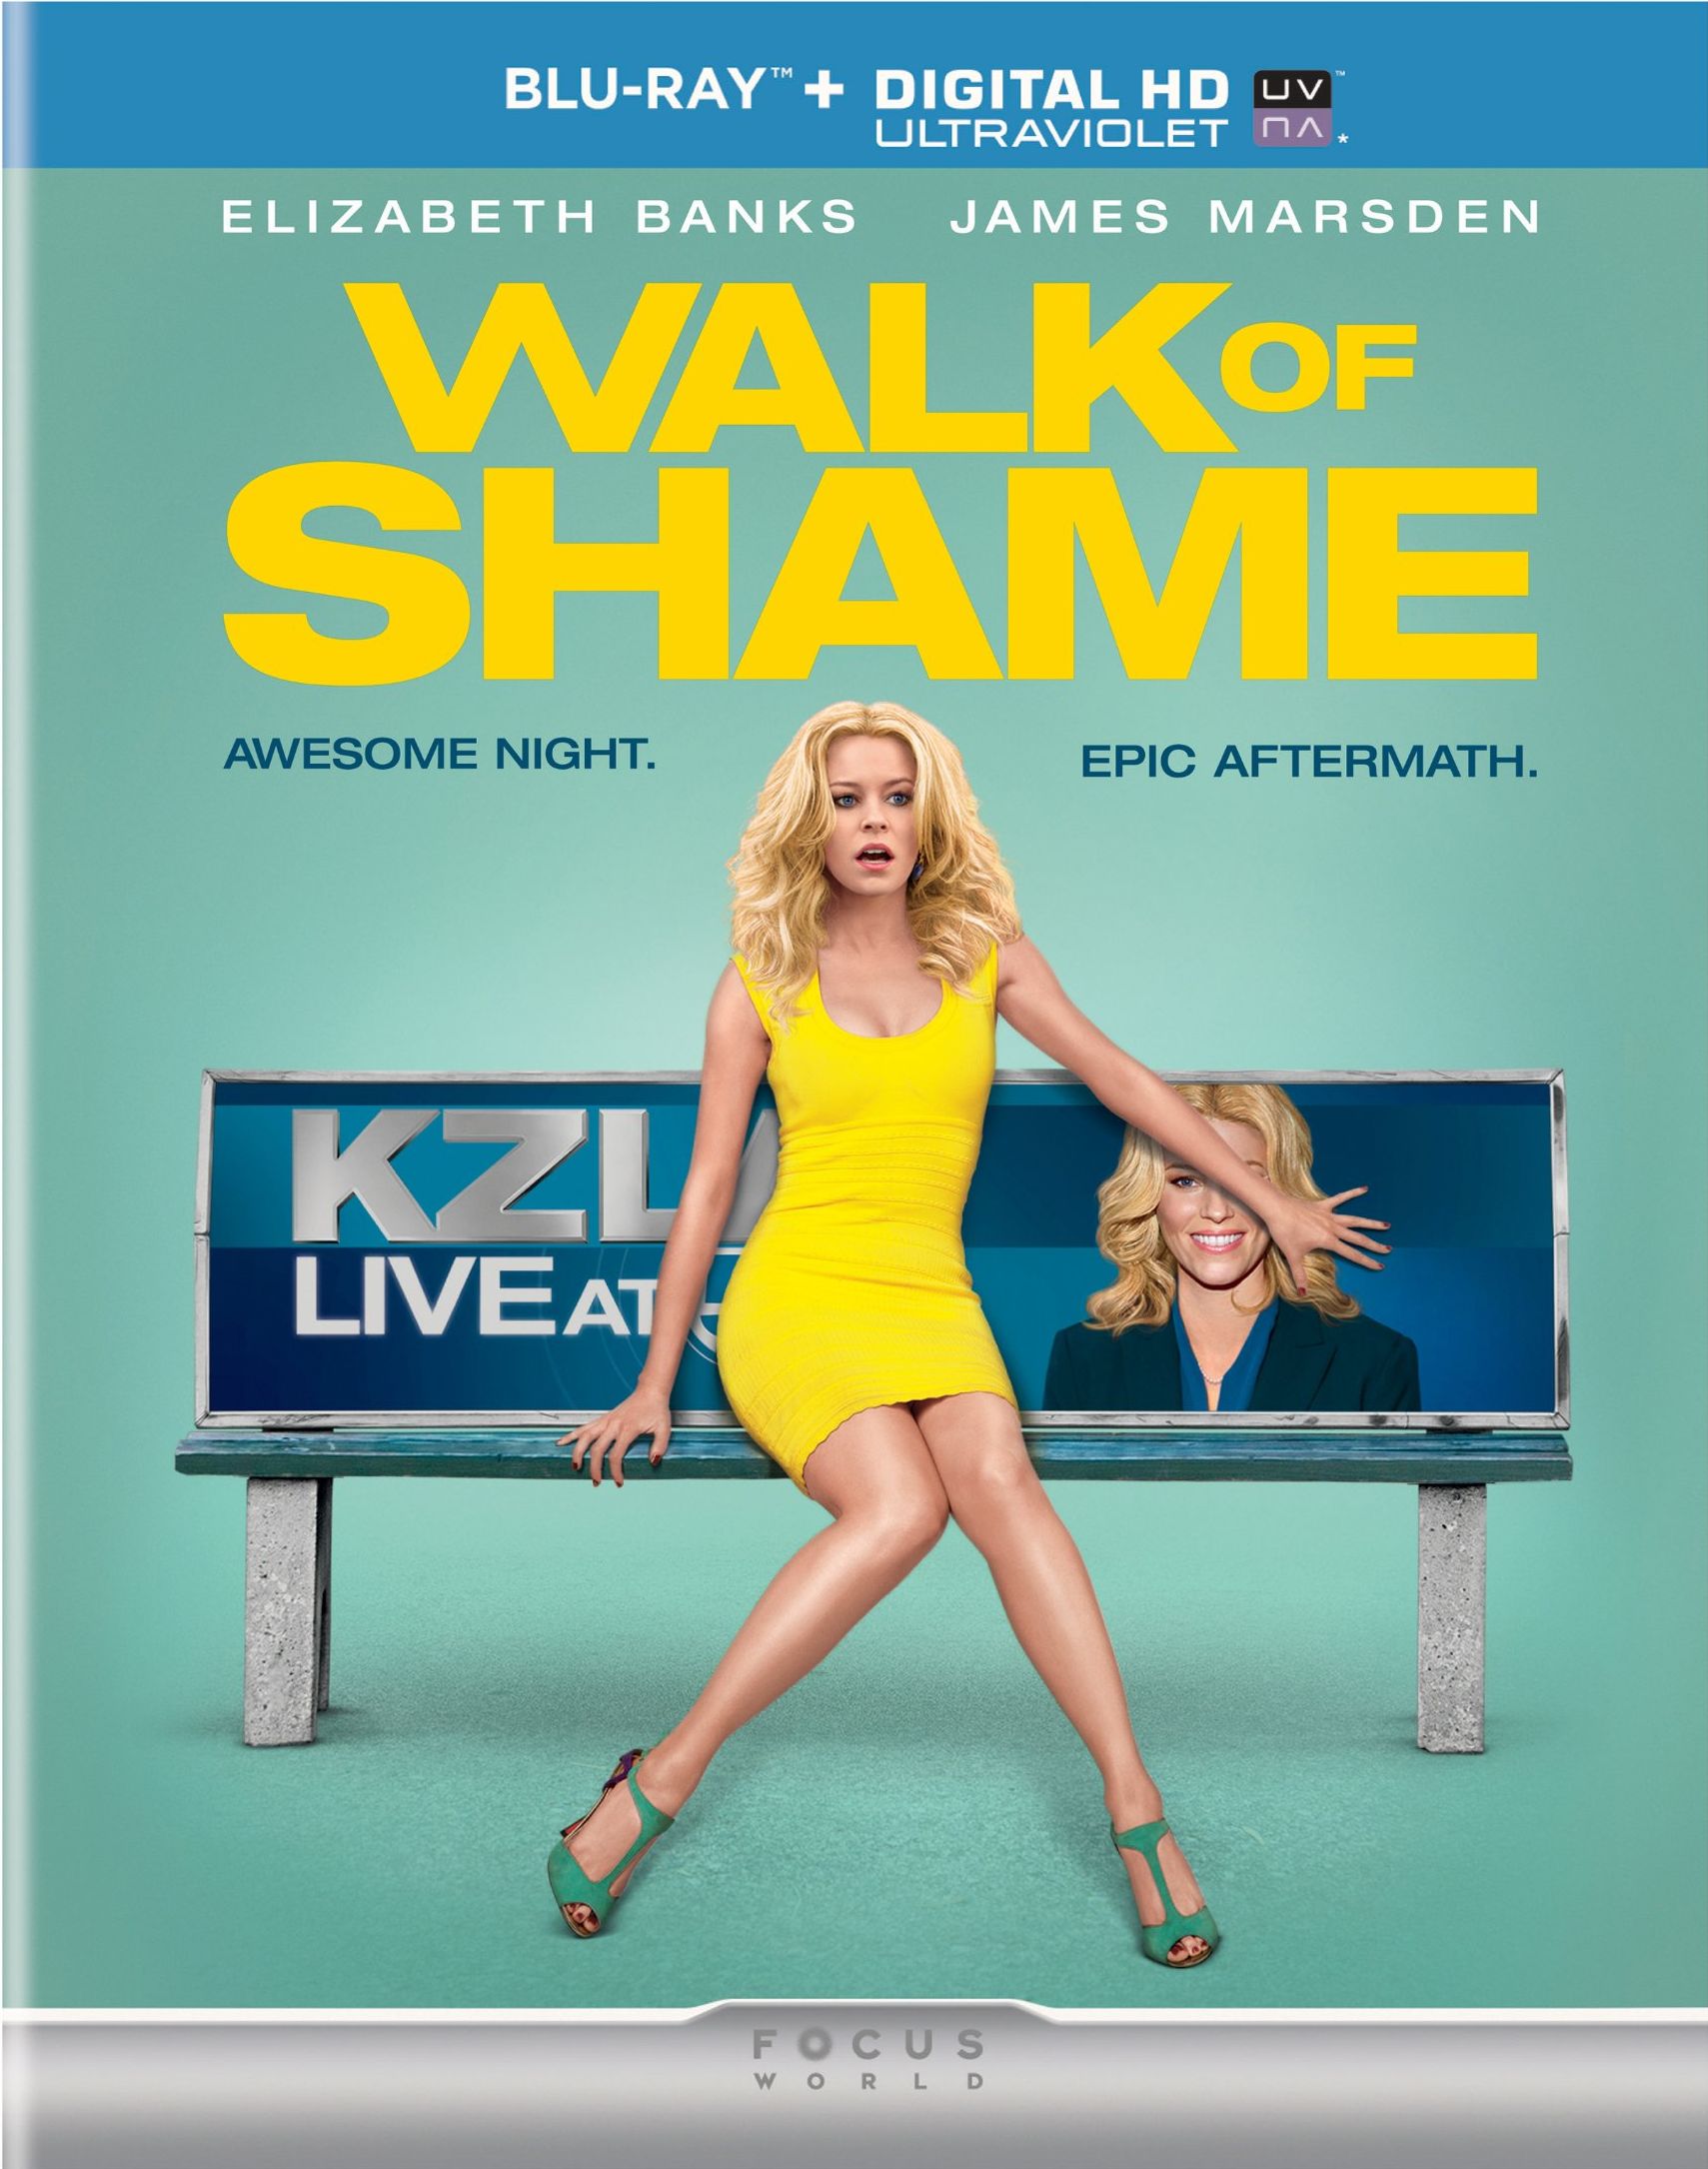 Walk of Shame Blu-ray Review